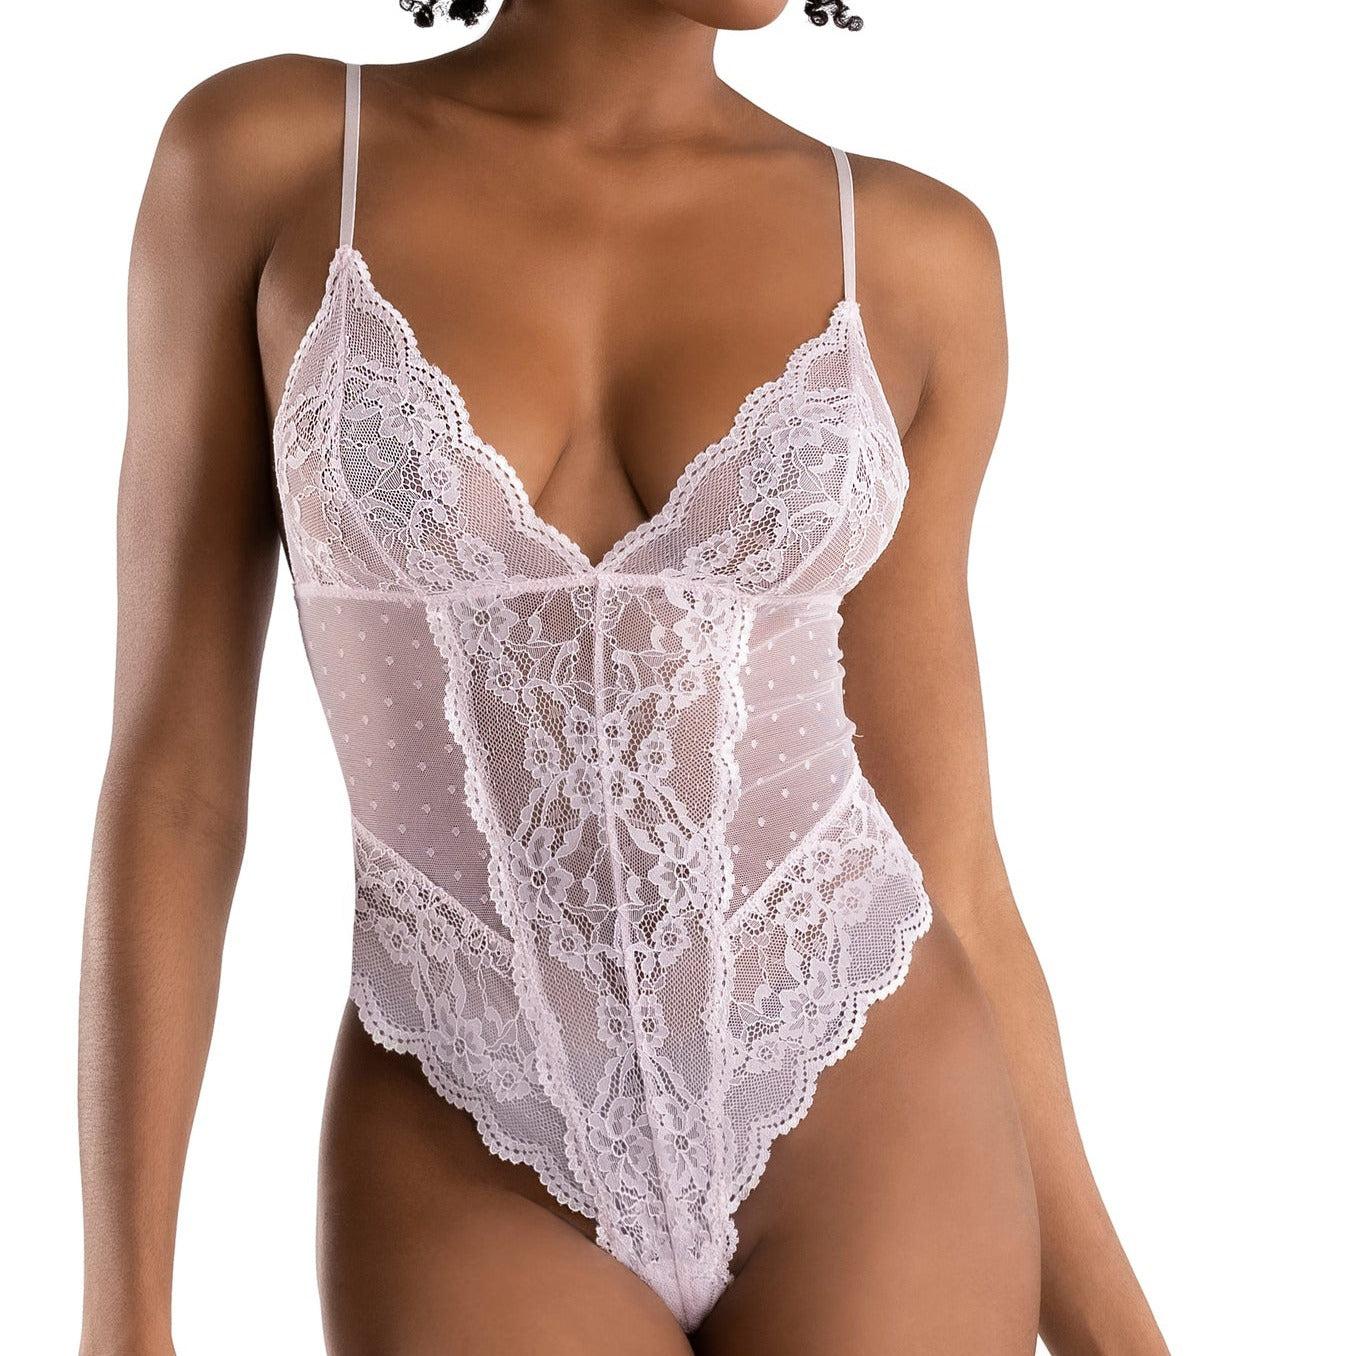 Jonquil Alice Teddy in Pale Pink AIC097-Bodysuit-Jonquil in Bloom-Palest Pink-XSmall-Anna Bella Fine Lingerie, Reveal Your Most Gorgeous Self!